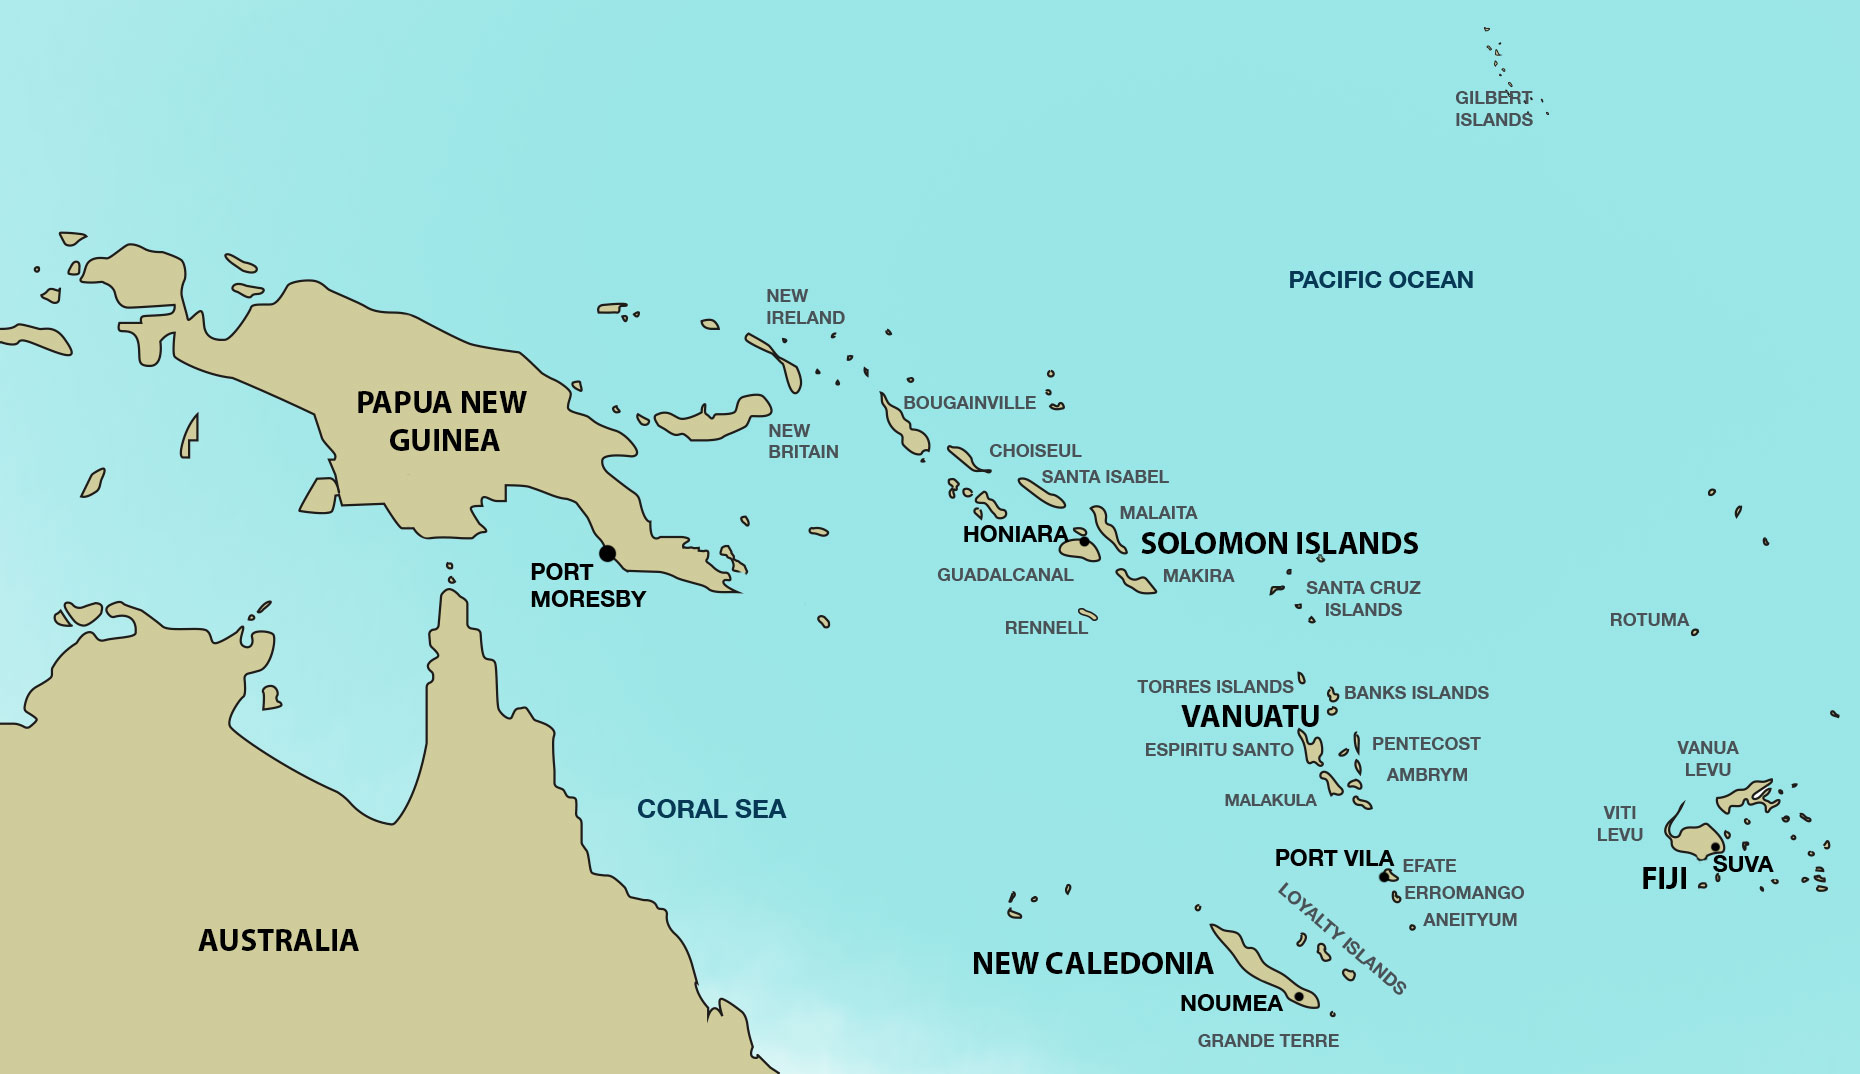 Map of islands in the Southern Pacific, to the east of Australia